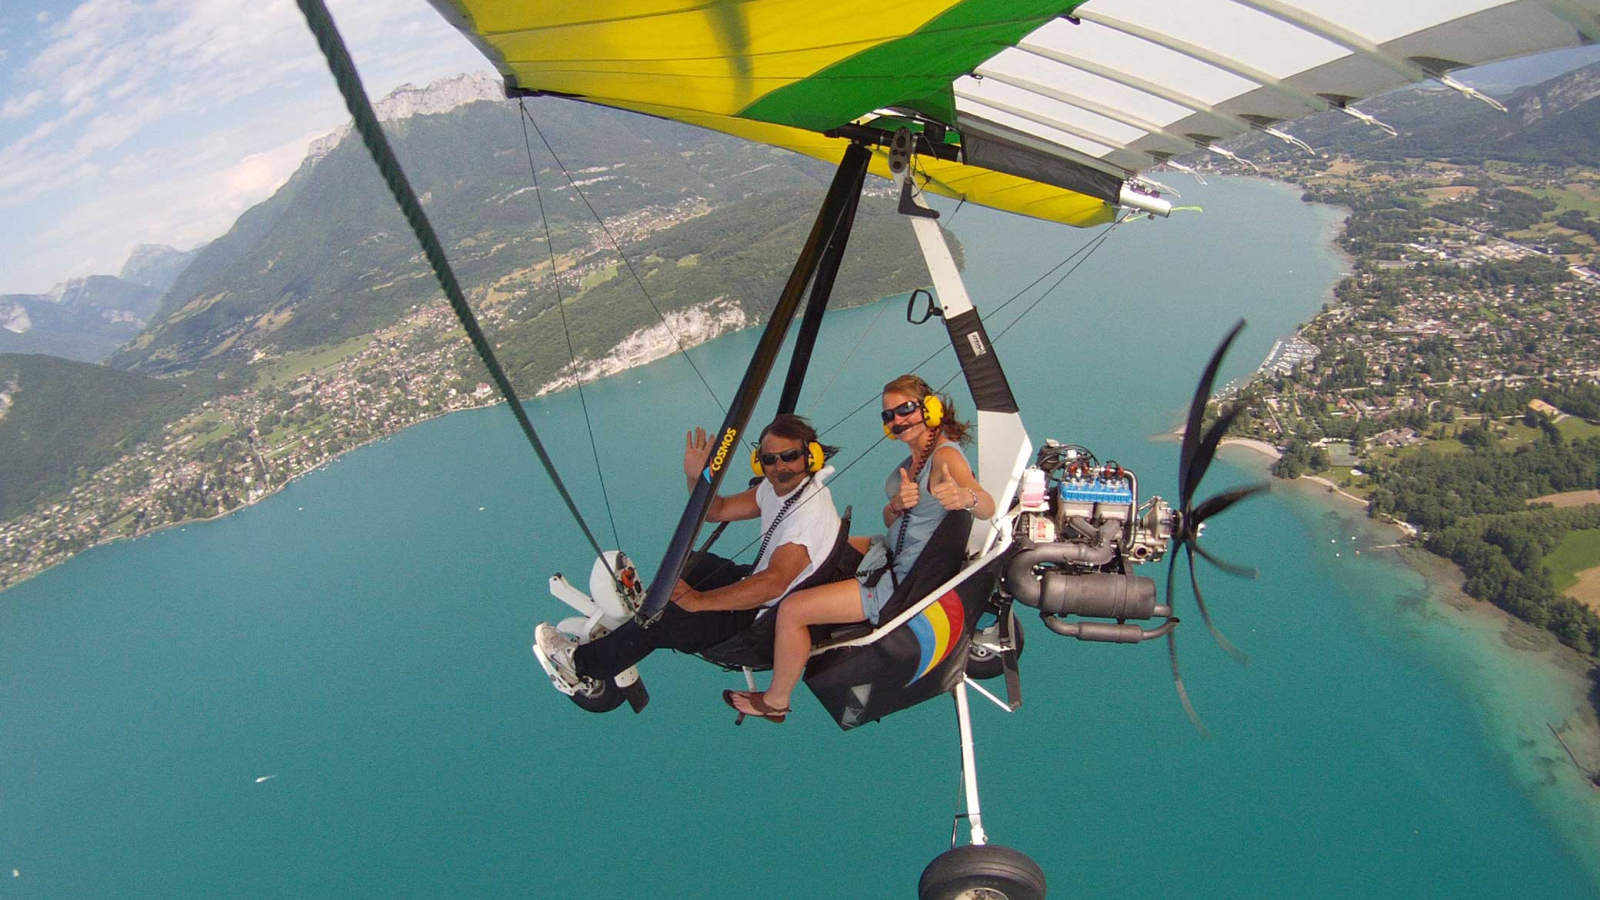 Hang-gliding flight above lake Annecy